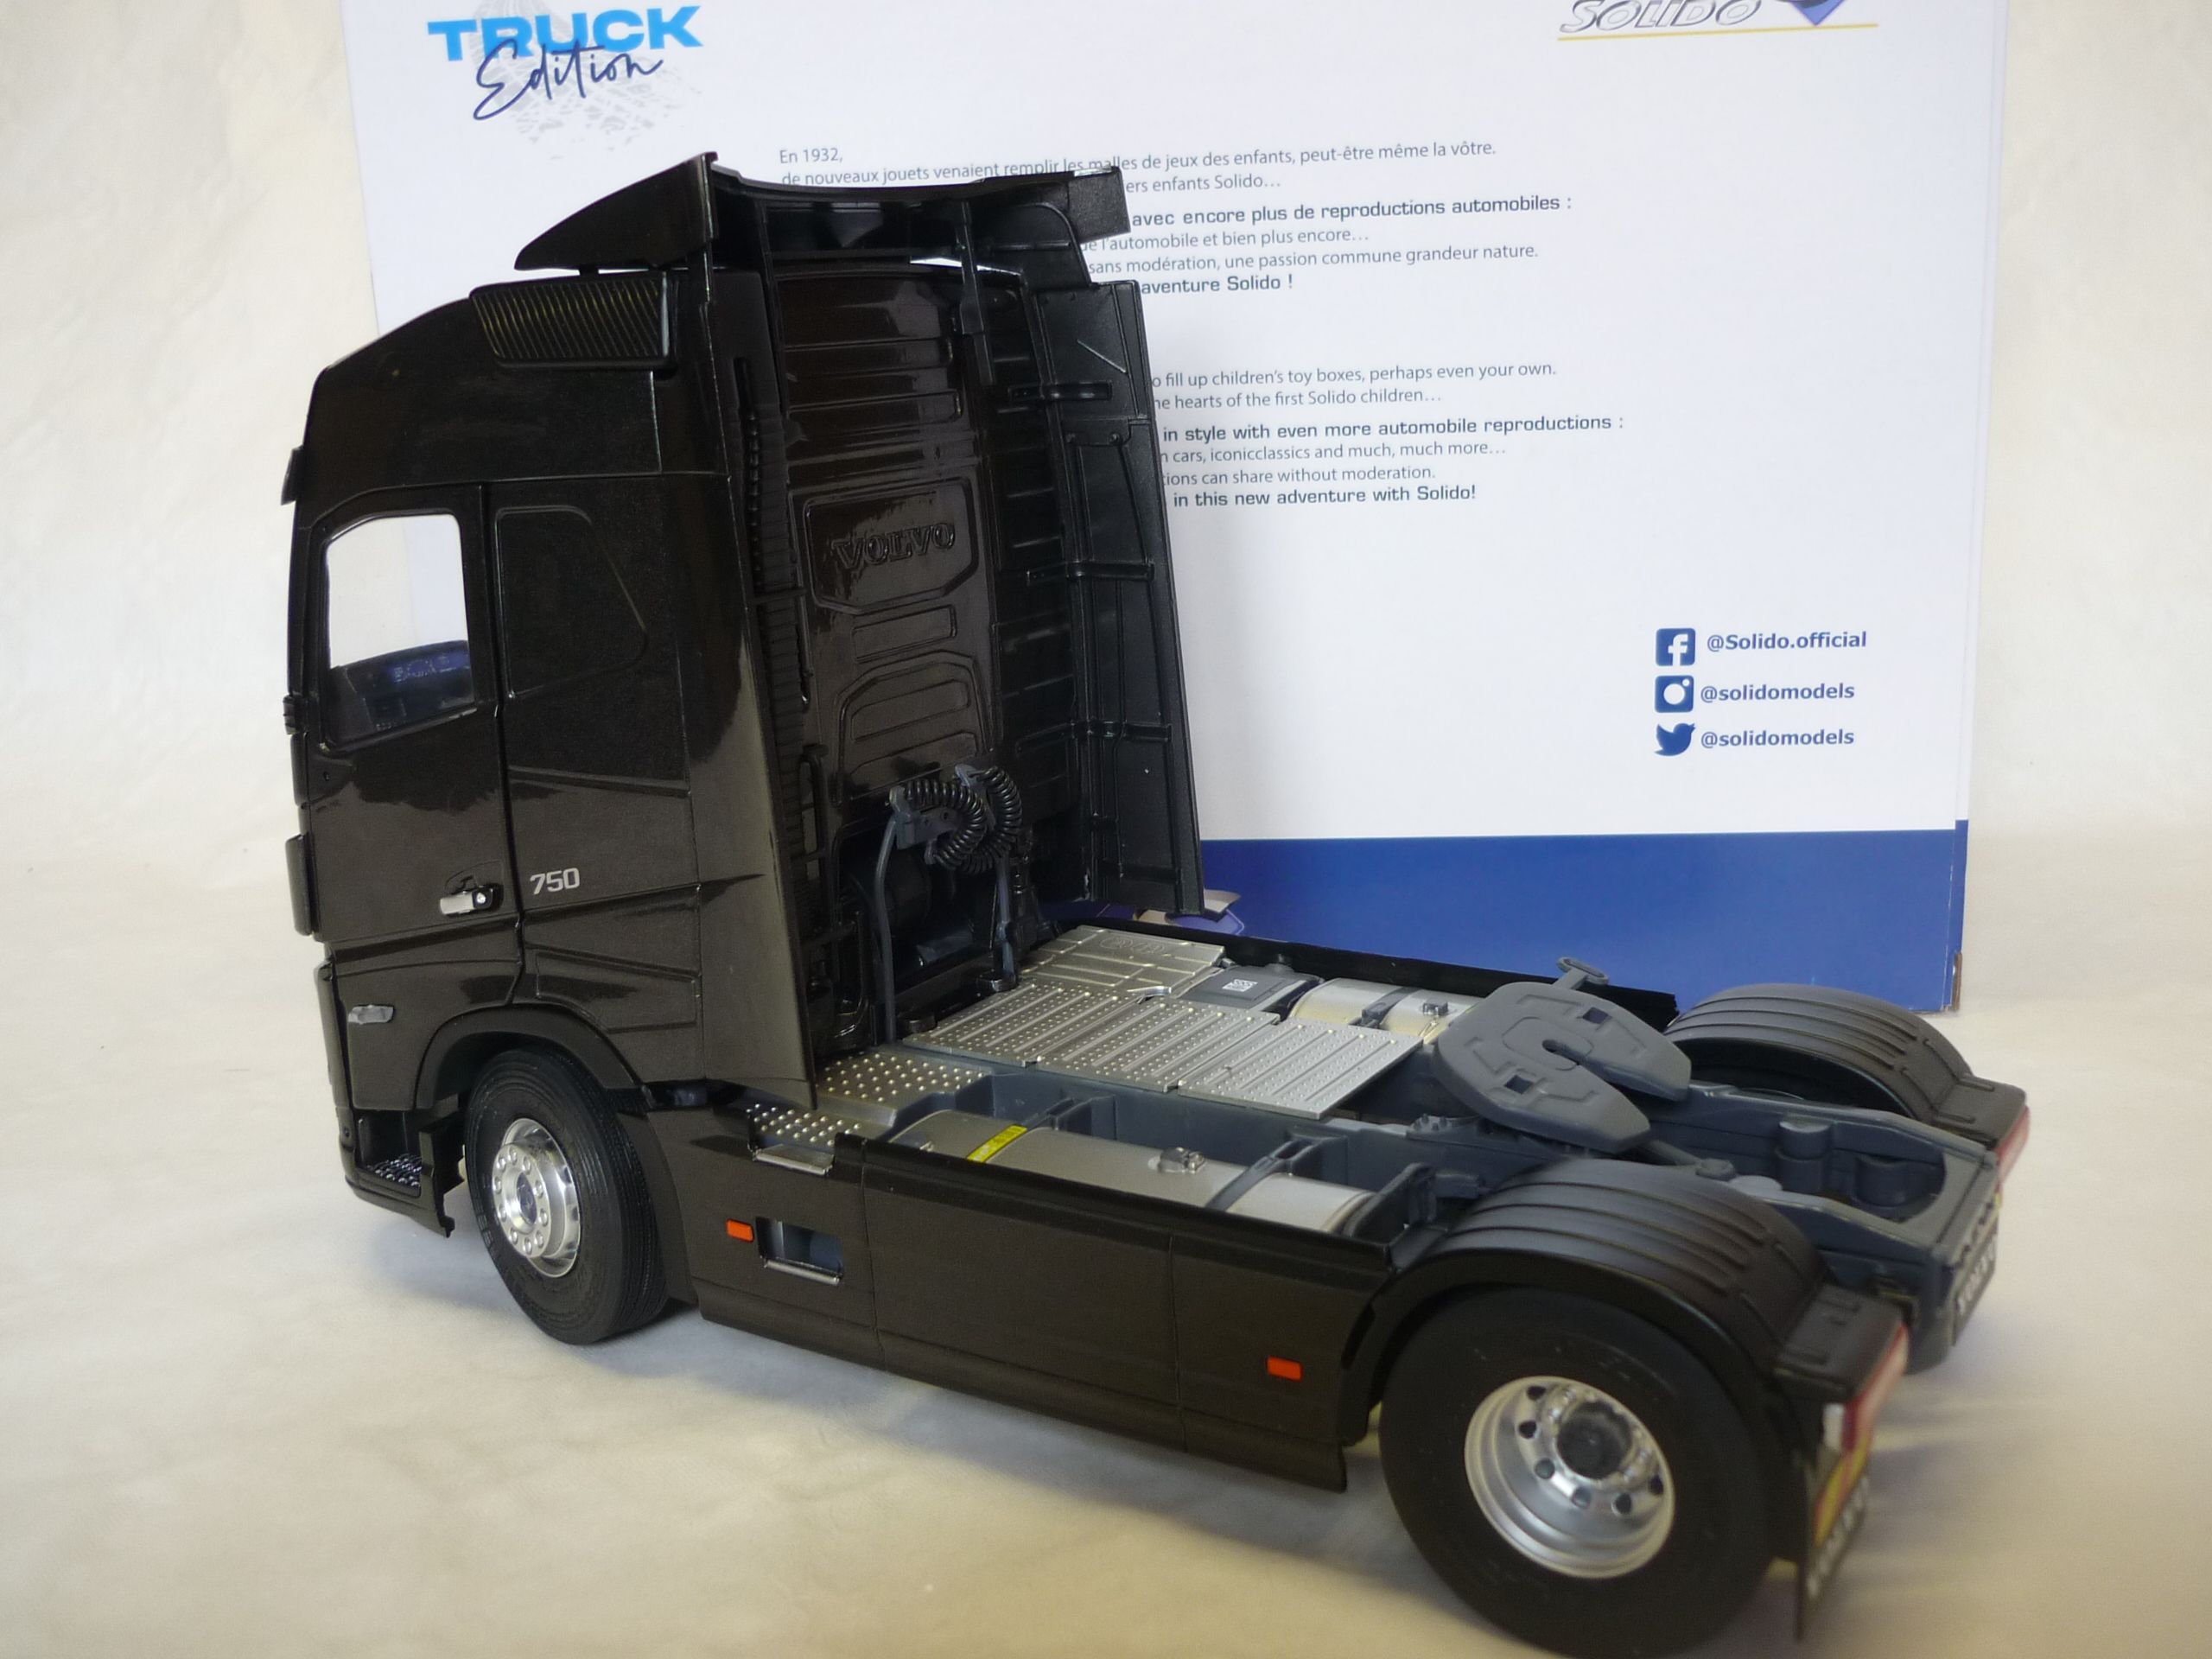 Solido 1:24 - 1 - Camion miniature - Volvo FH Globetrotter XL